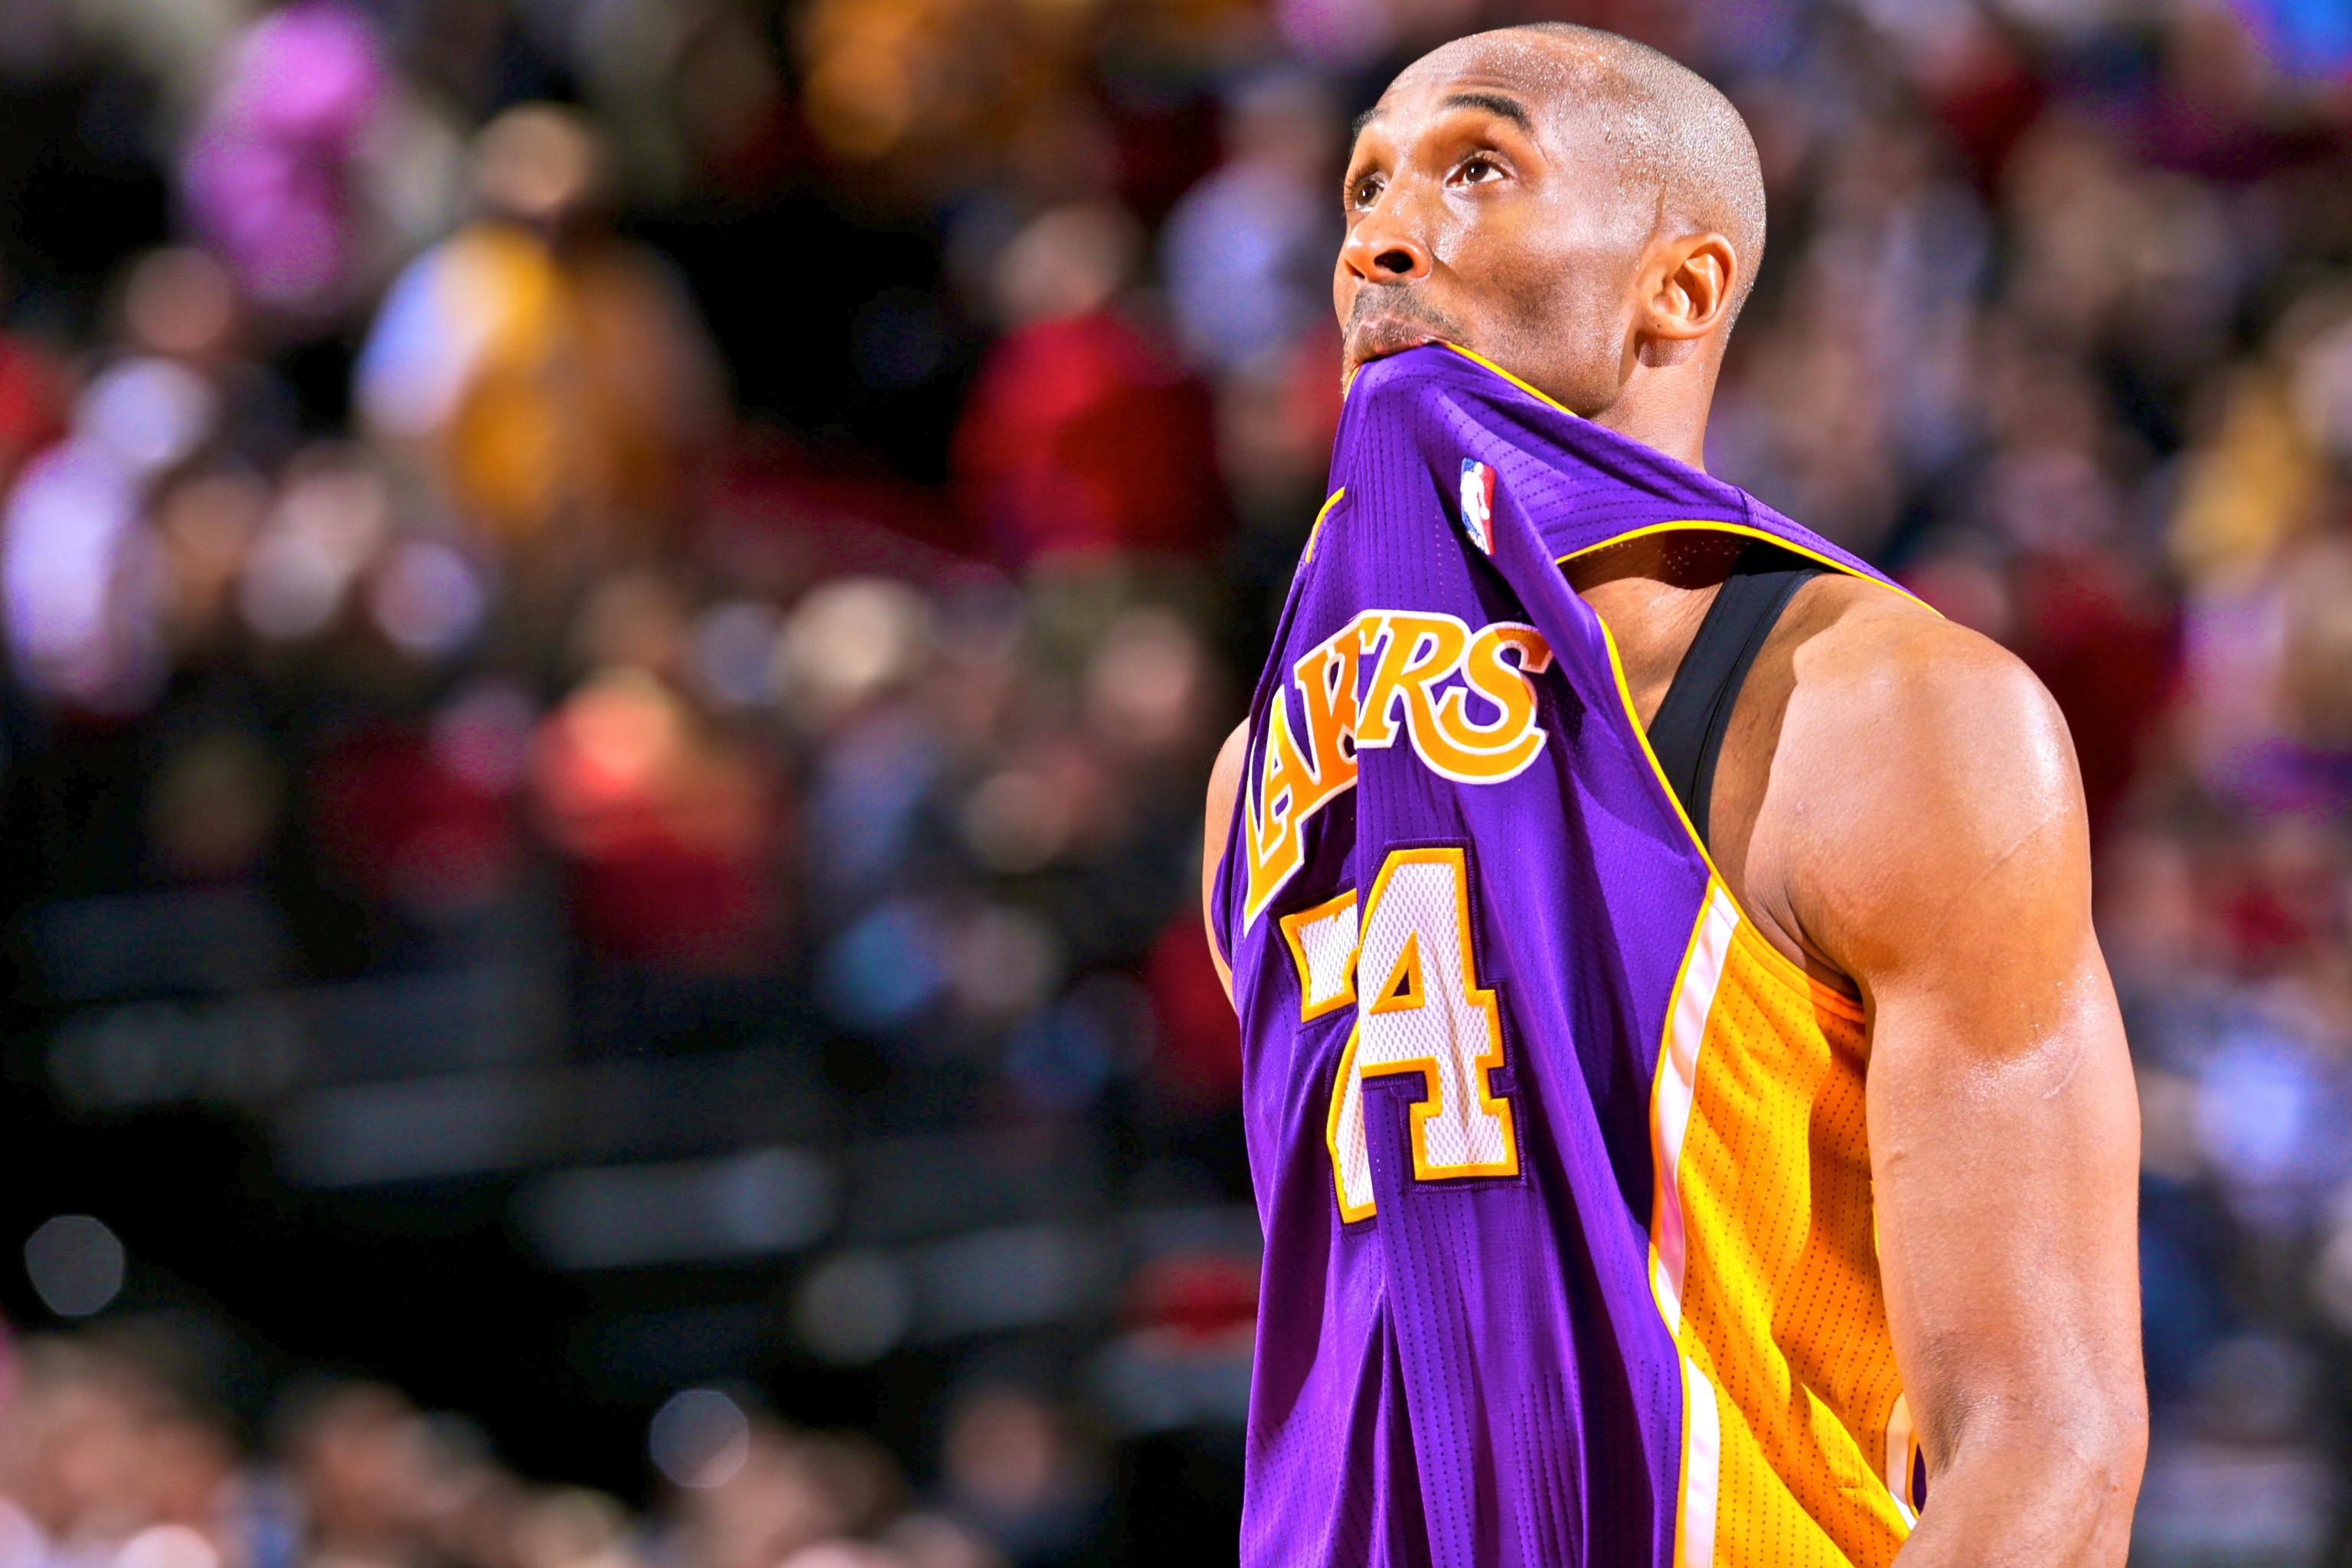 Kobe Bryant is gone, but his ambition will live forever - The